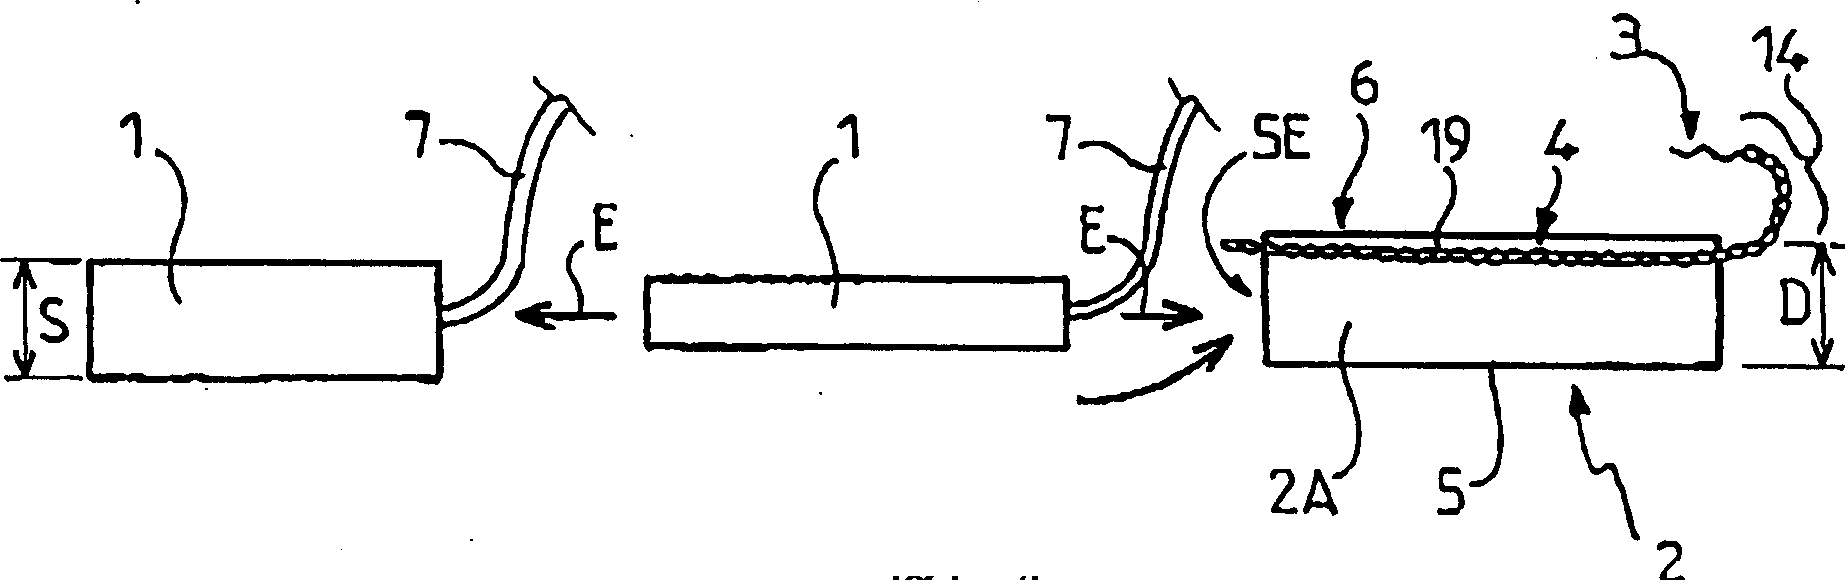 Kit for the insertion of an intragastric implant, case for inserting such an implant, and corresponding production method